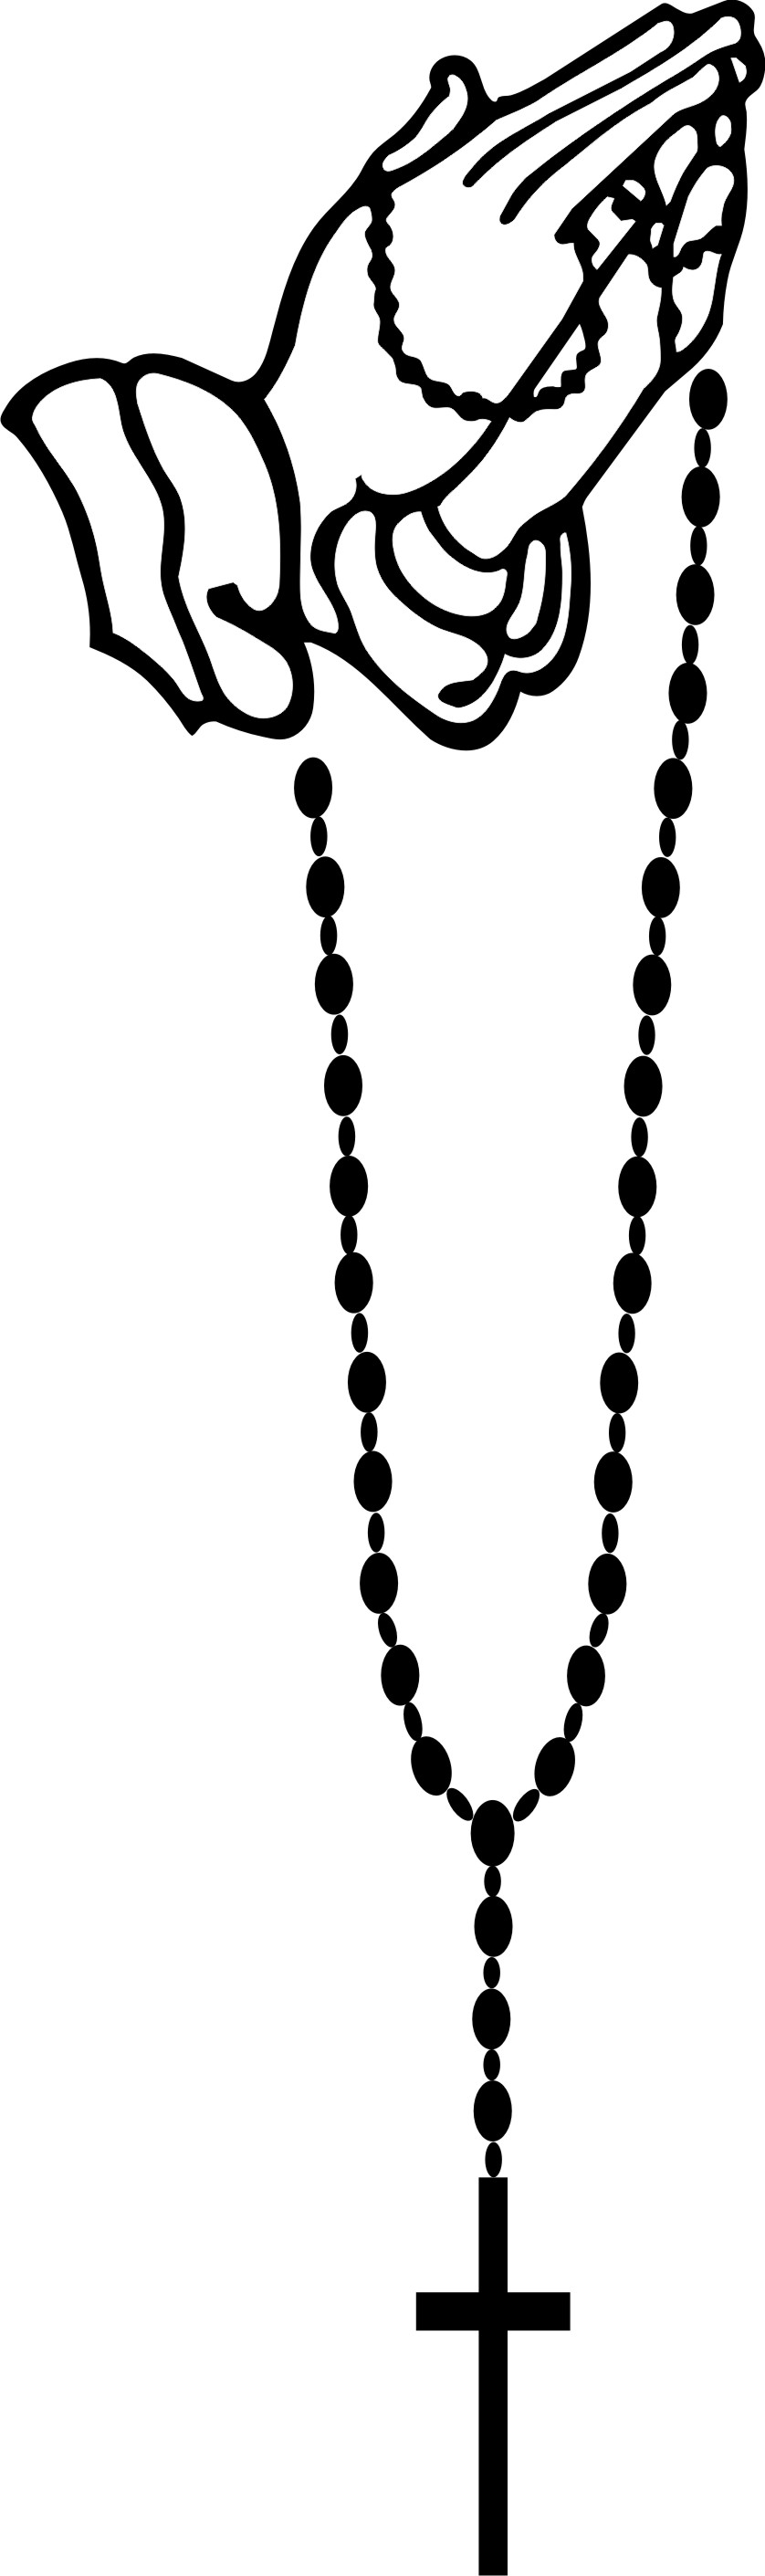 Rosary clipart images - ClipartFest